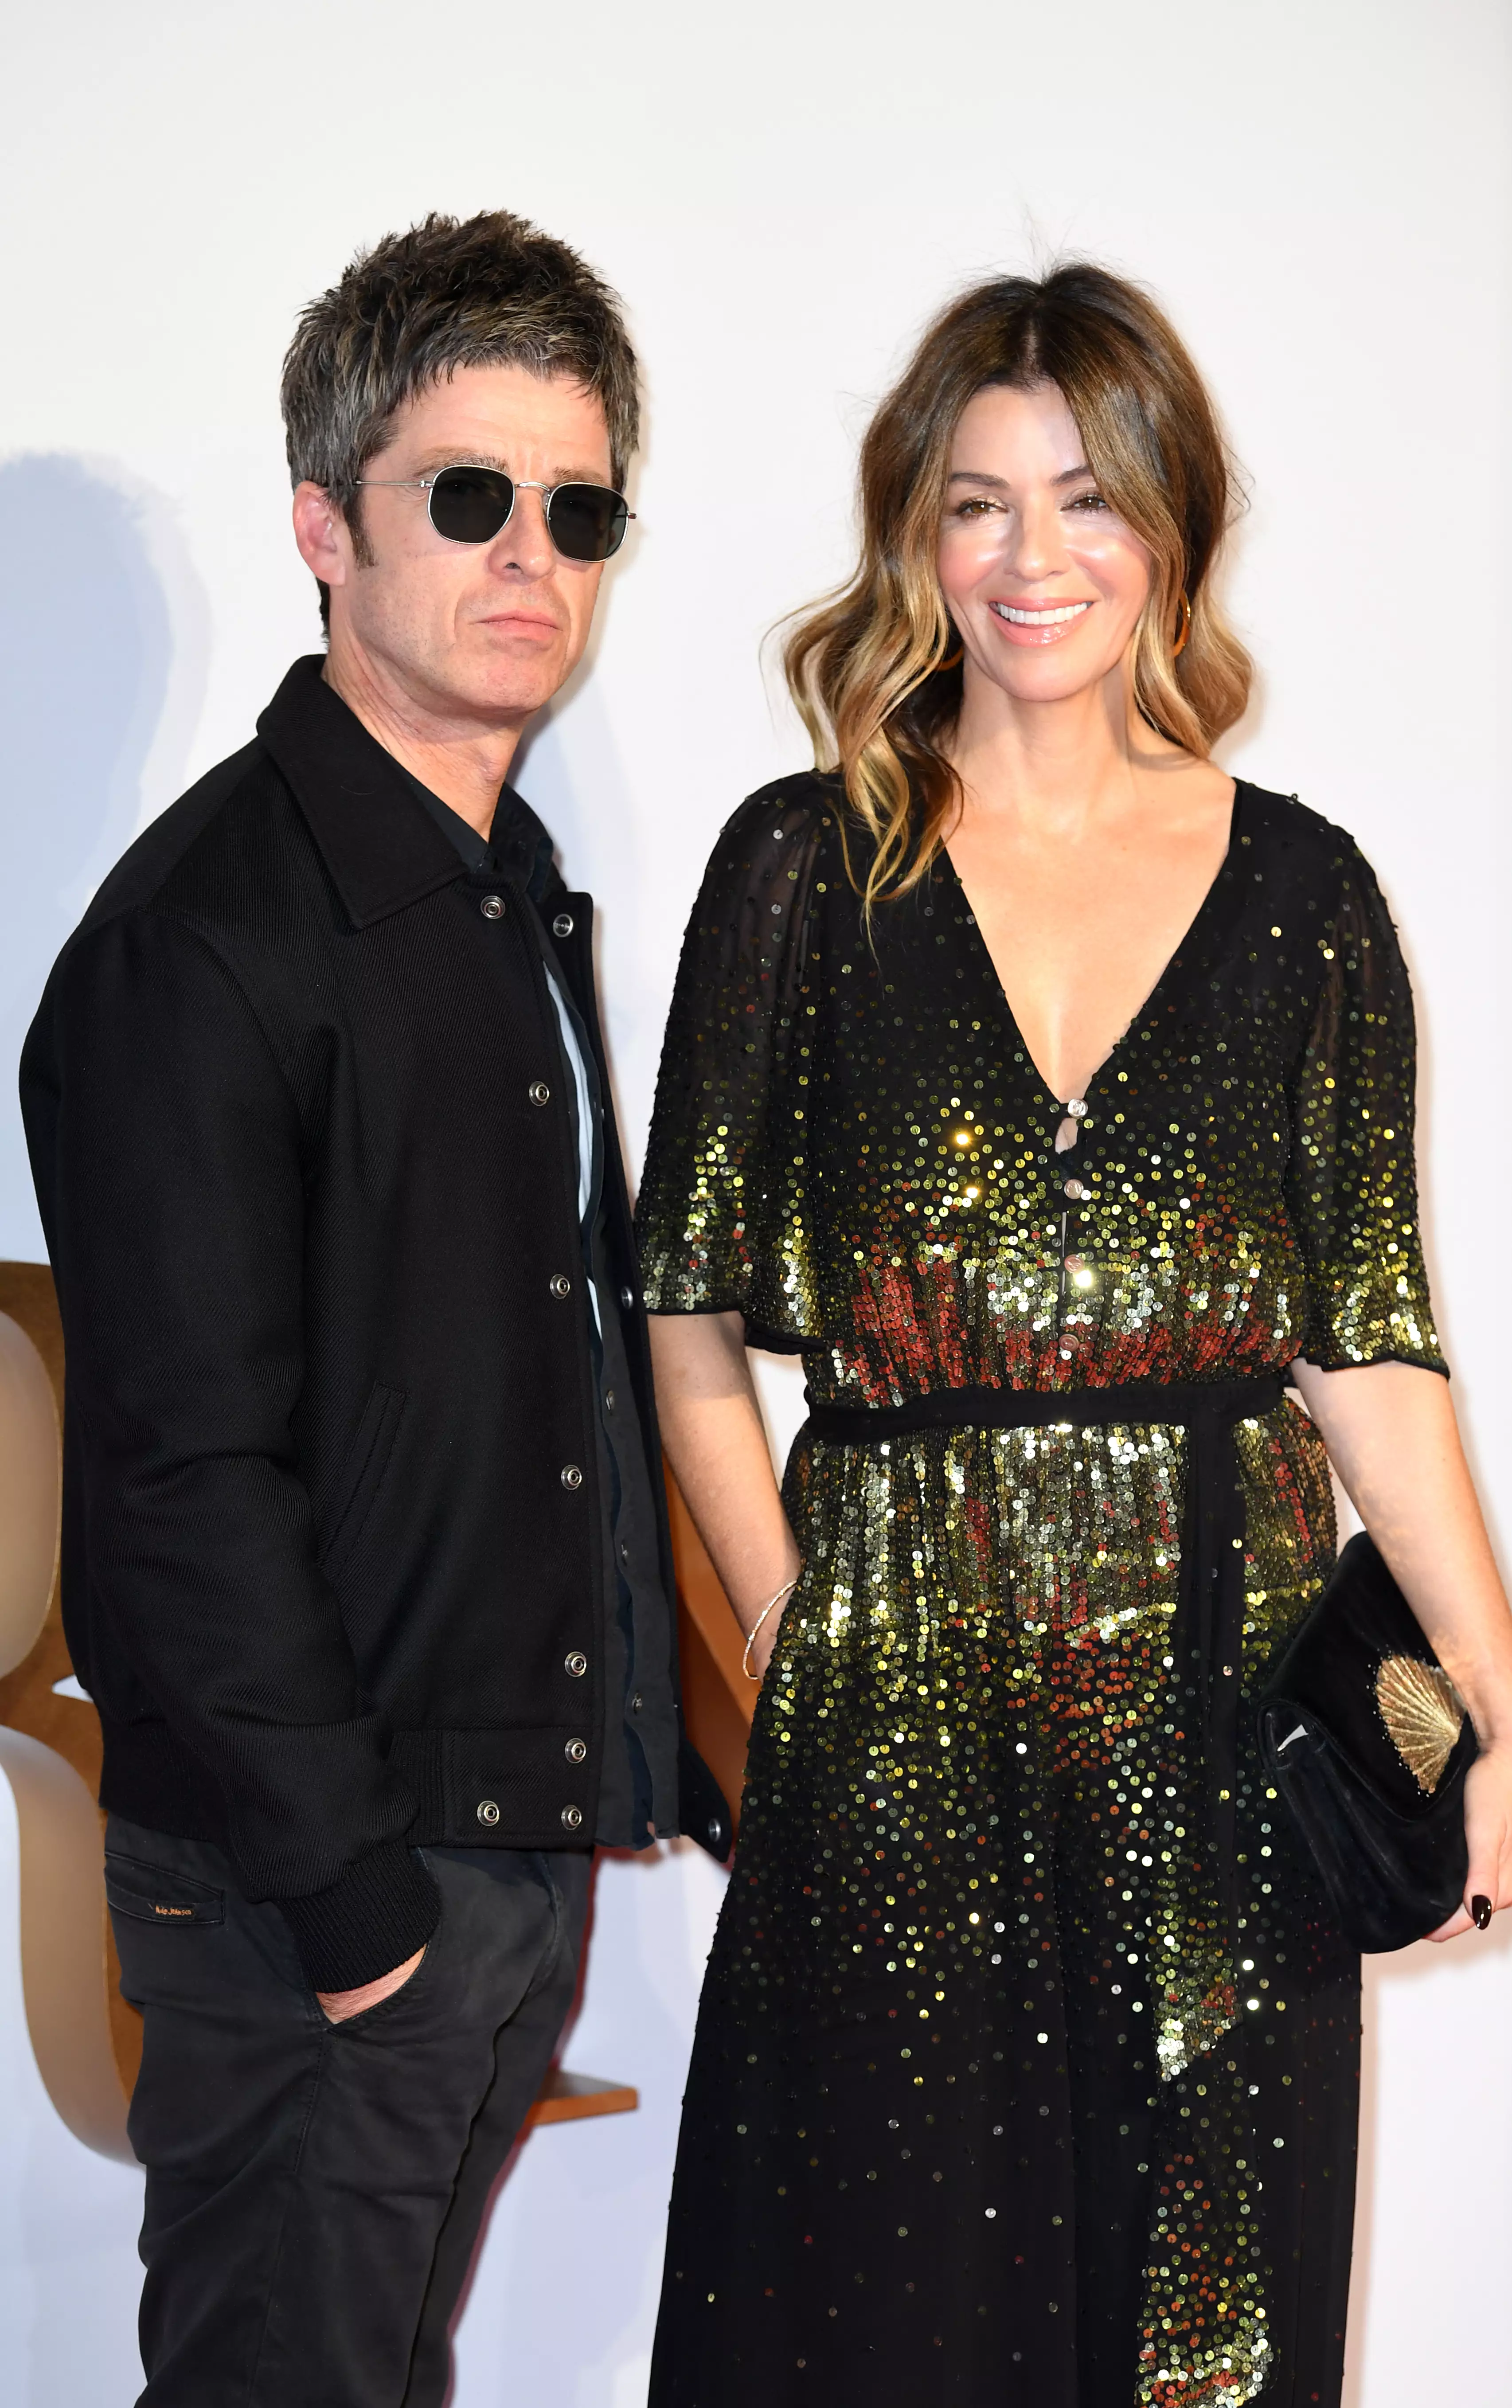 Noel Gallagher has hit out at his brother over an alleged 'threatening message' he sent his daughter.